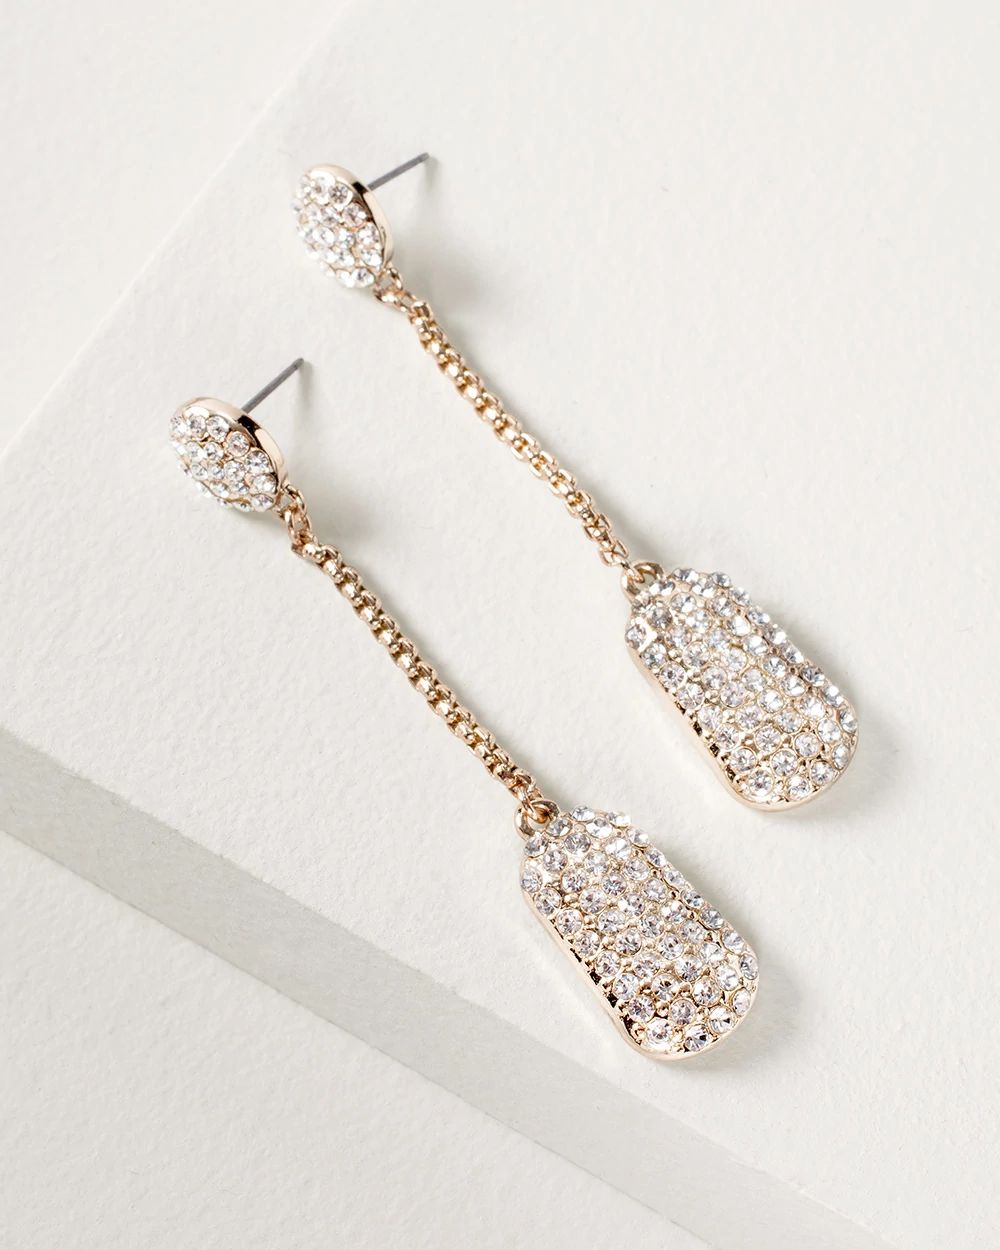 Pavé Goldtone Linear Drop Earrings click to view larger image.